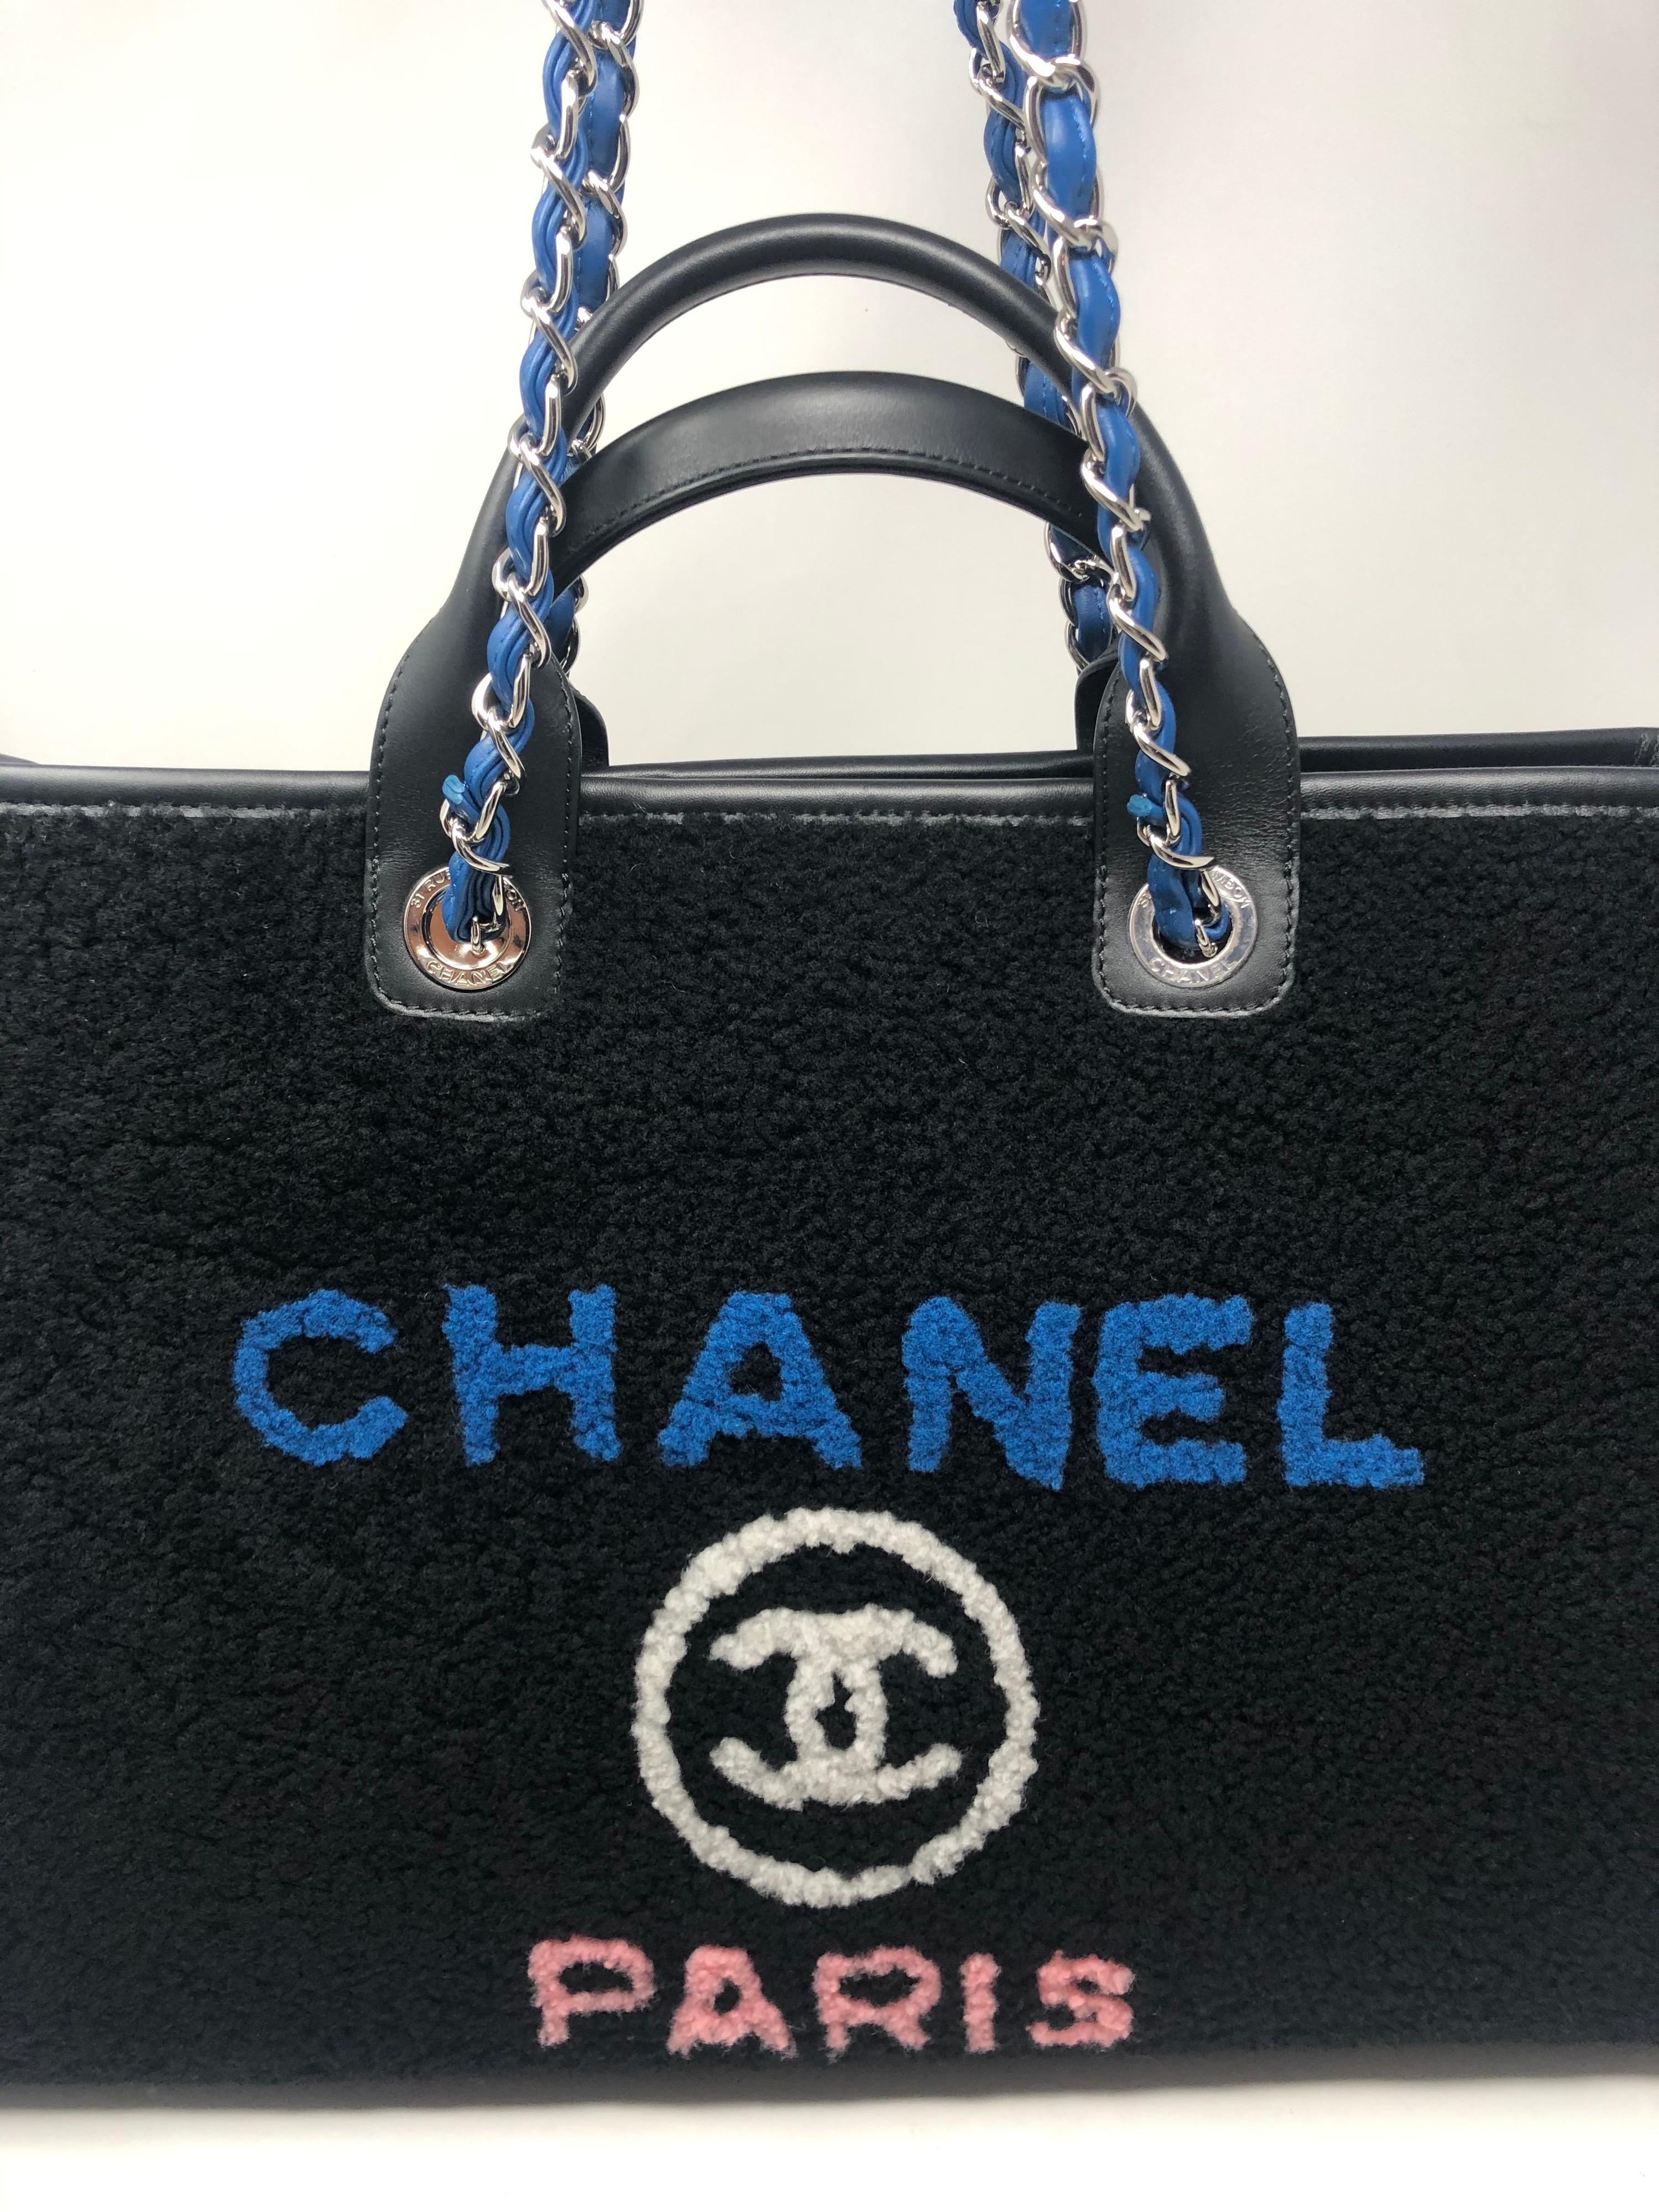 Chanel Shearling Deauville X Large Tote Bag  6